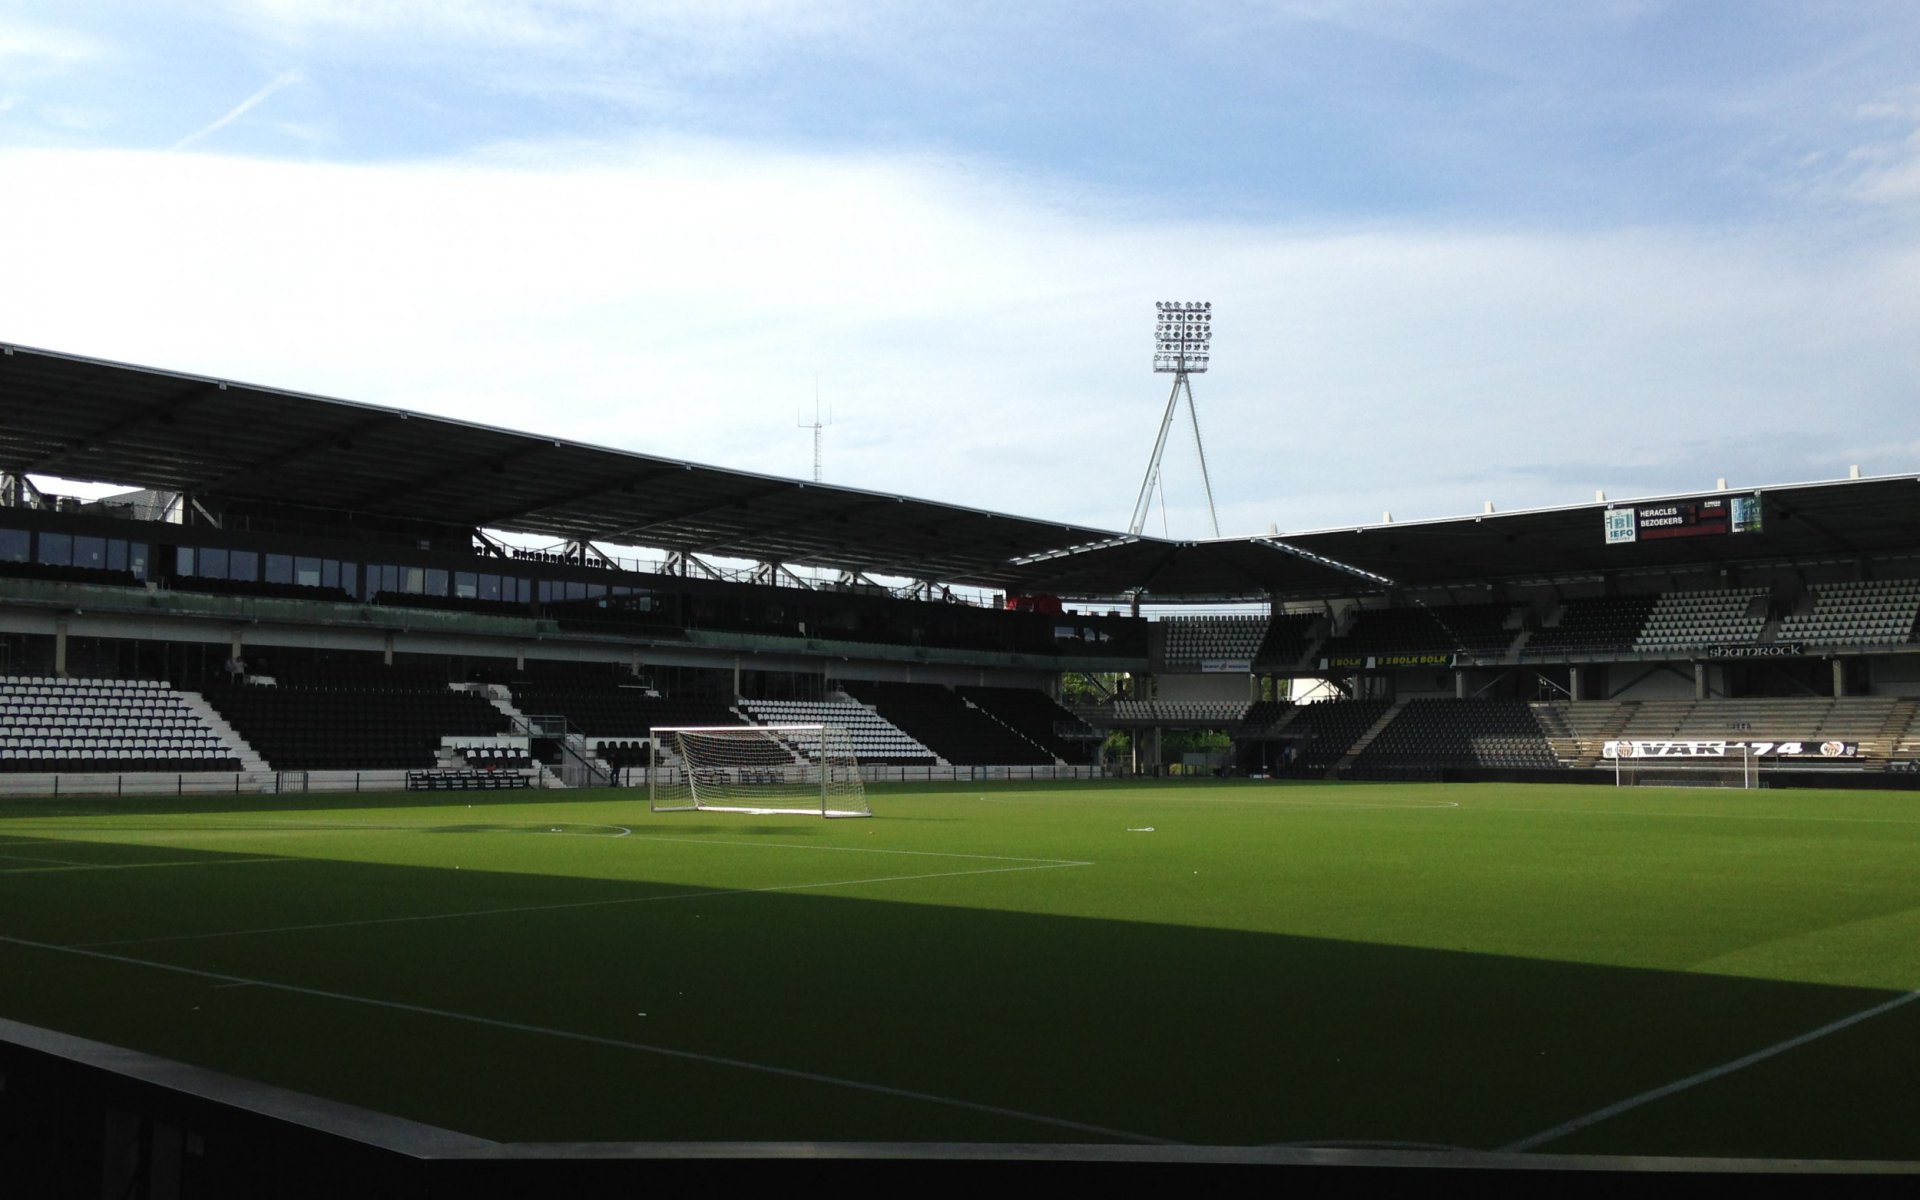 Palazzo - stadion Heracles Almelo 2